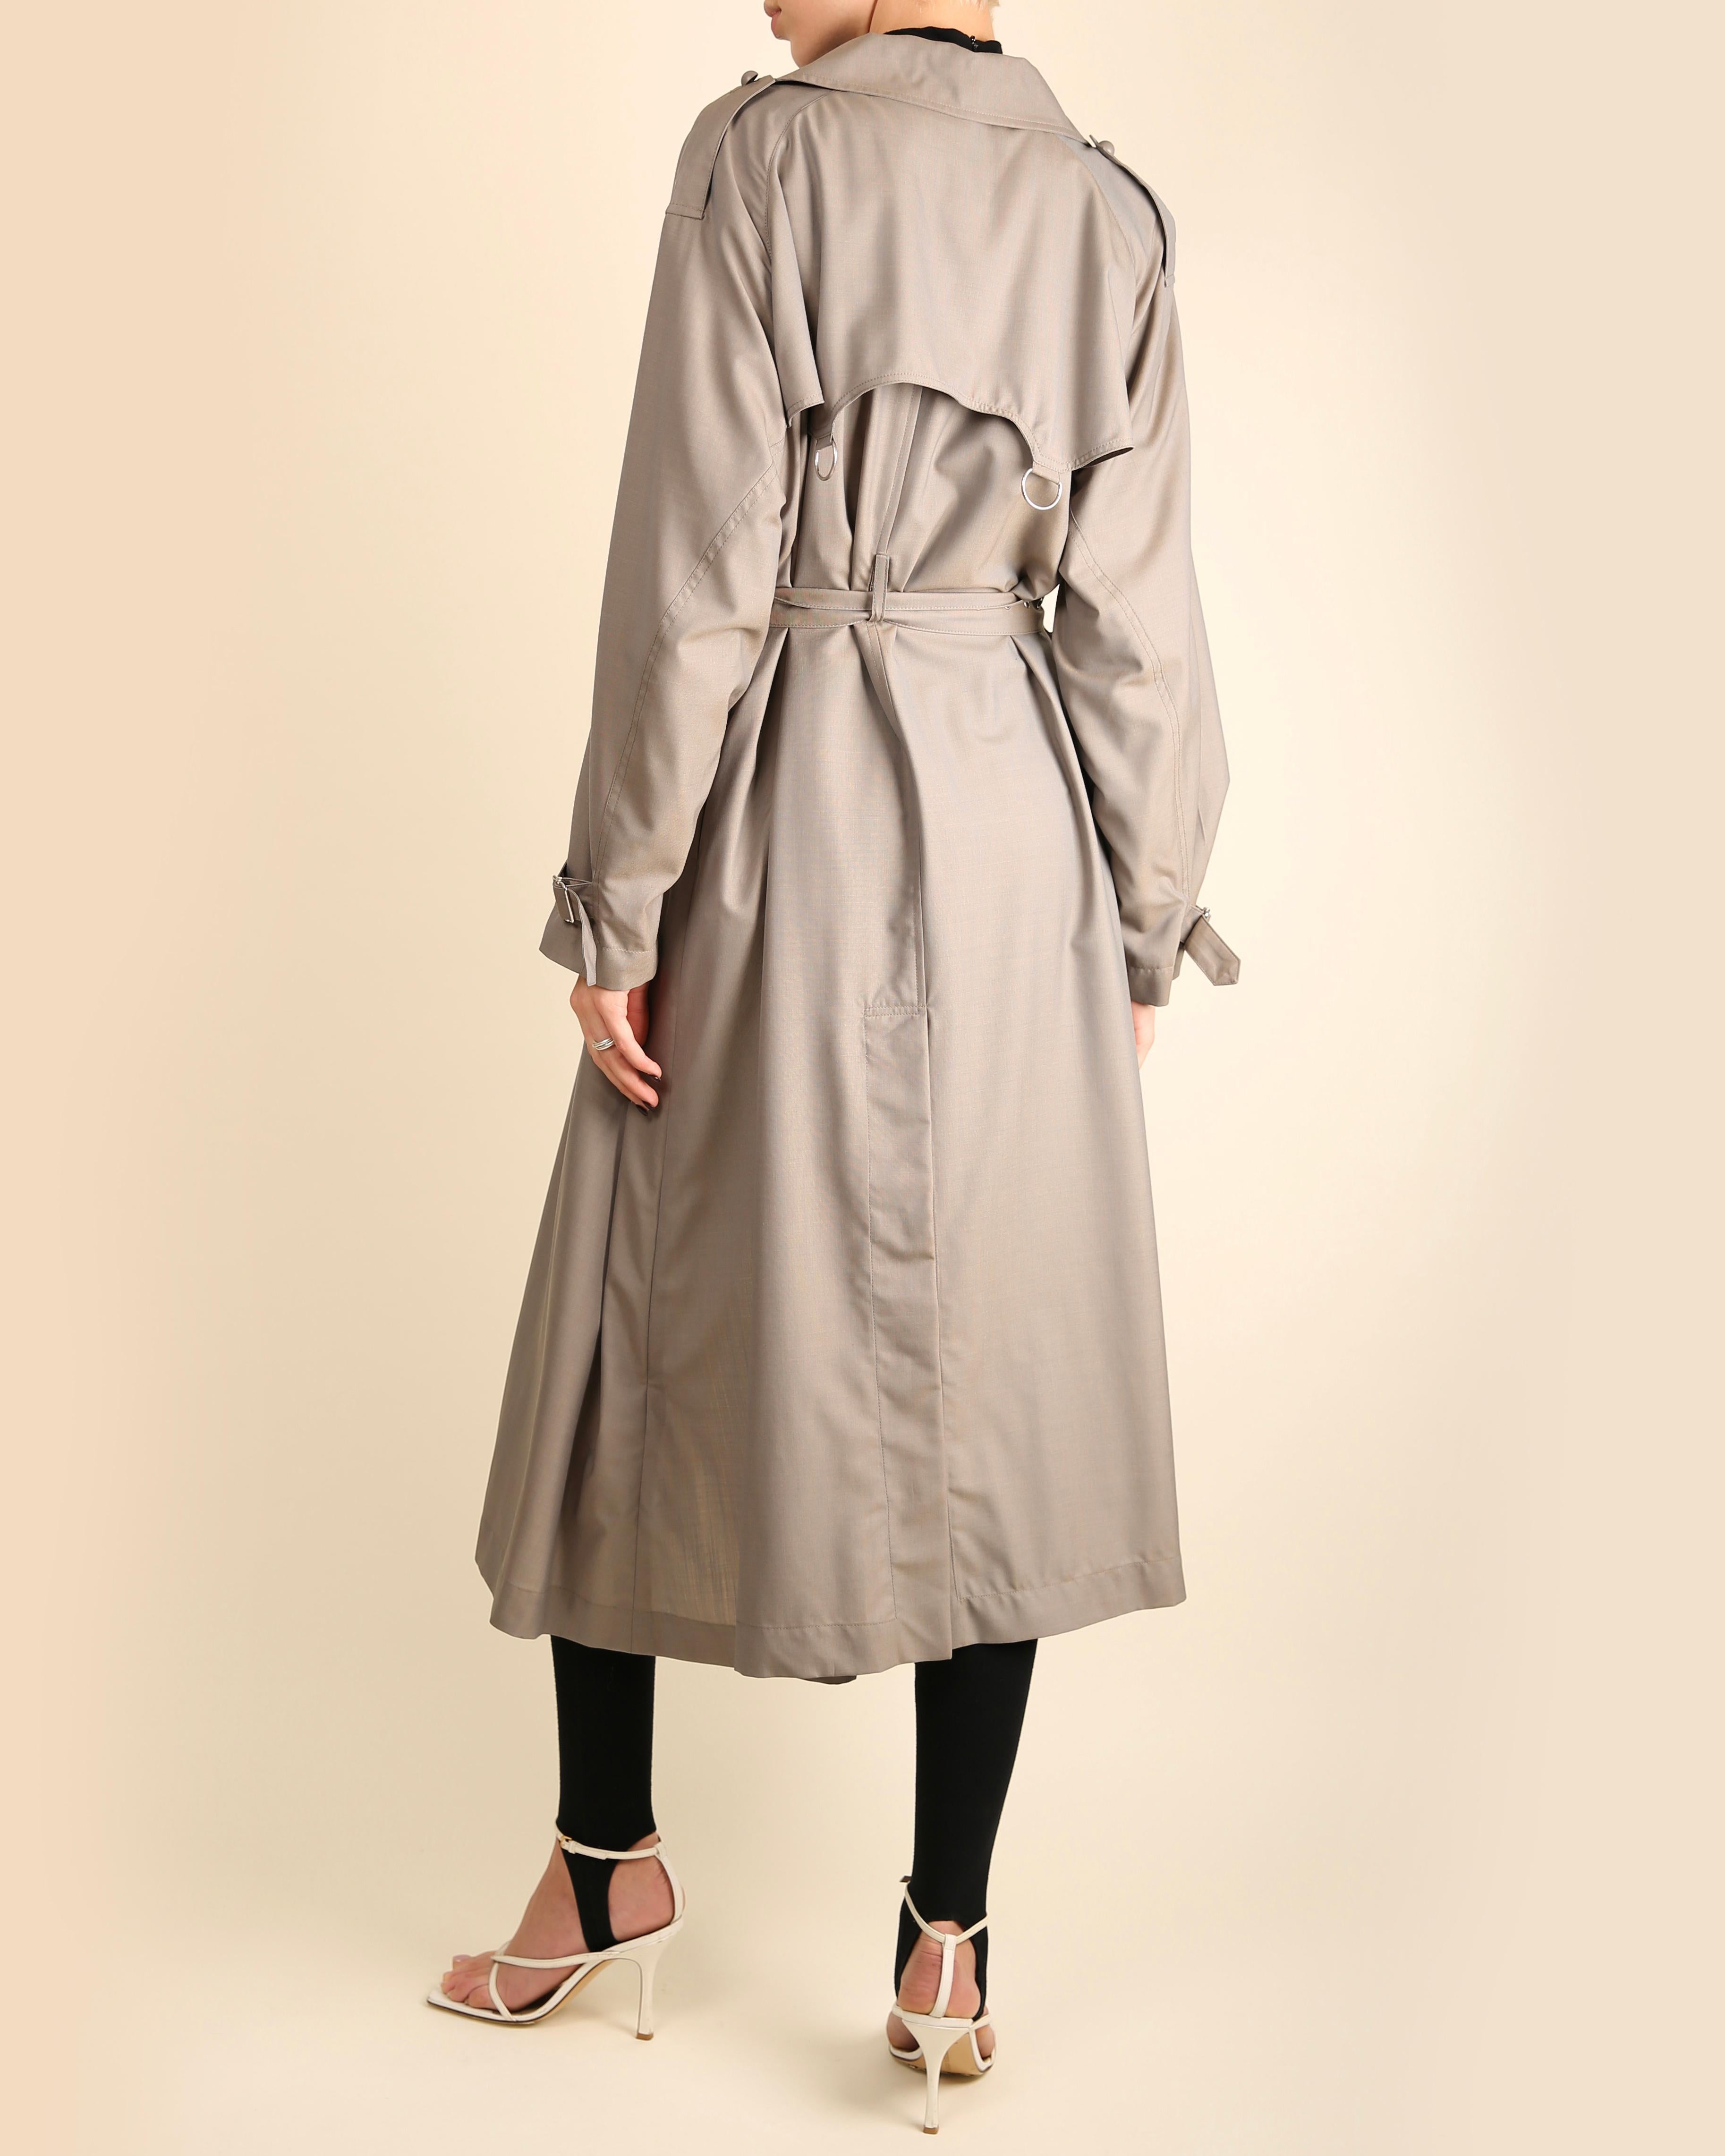 Celine Fall 2017 grey oversized maxi belted wool cashmere trench coat FR 36 7